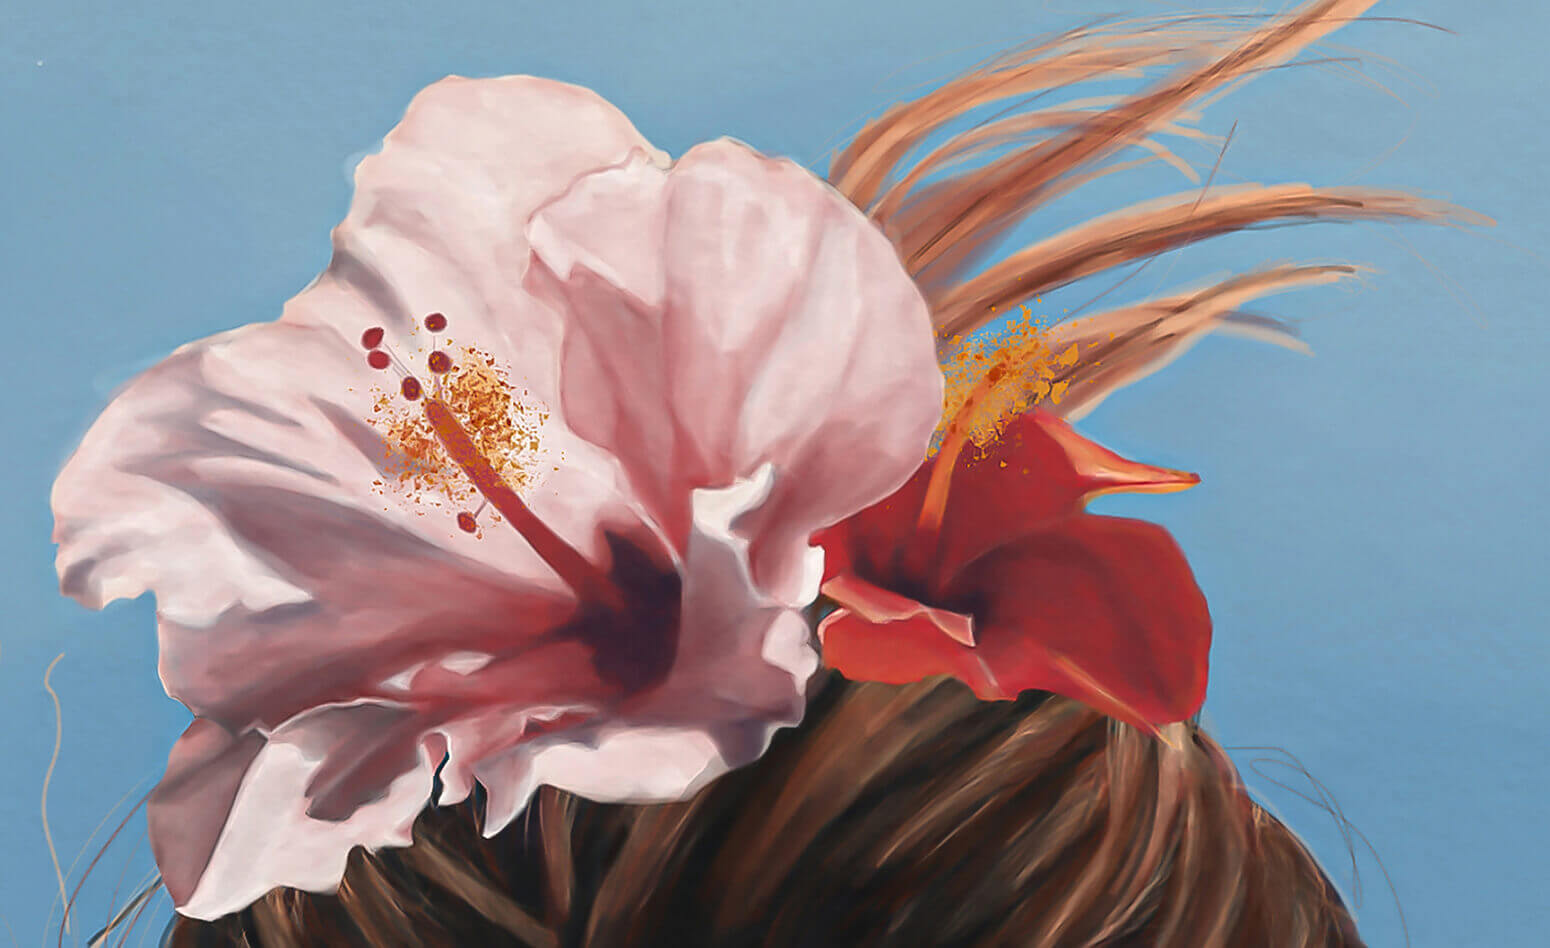 Hair in a bun with a hisbicus flower from artwork by JT Ojerio of Aloha de Mele